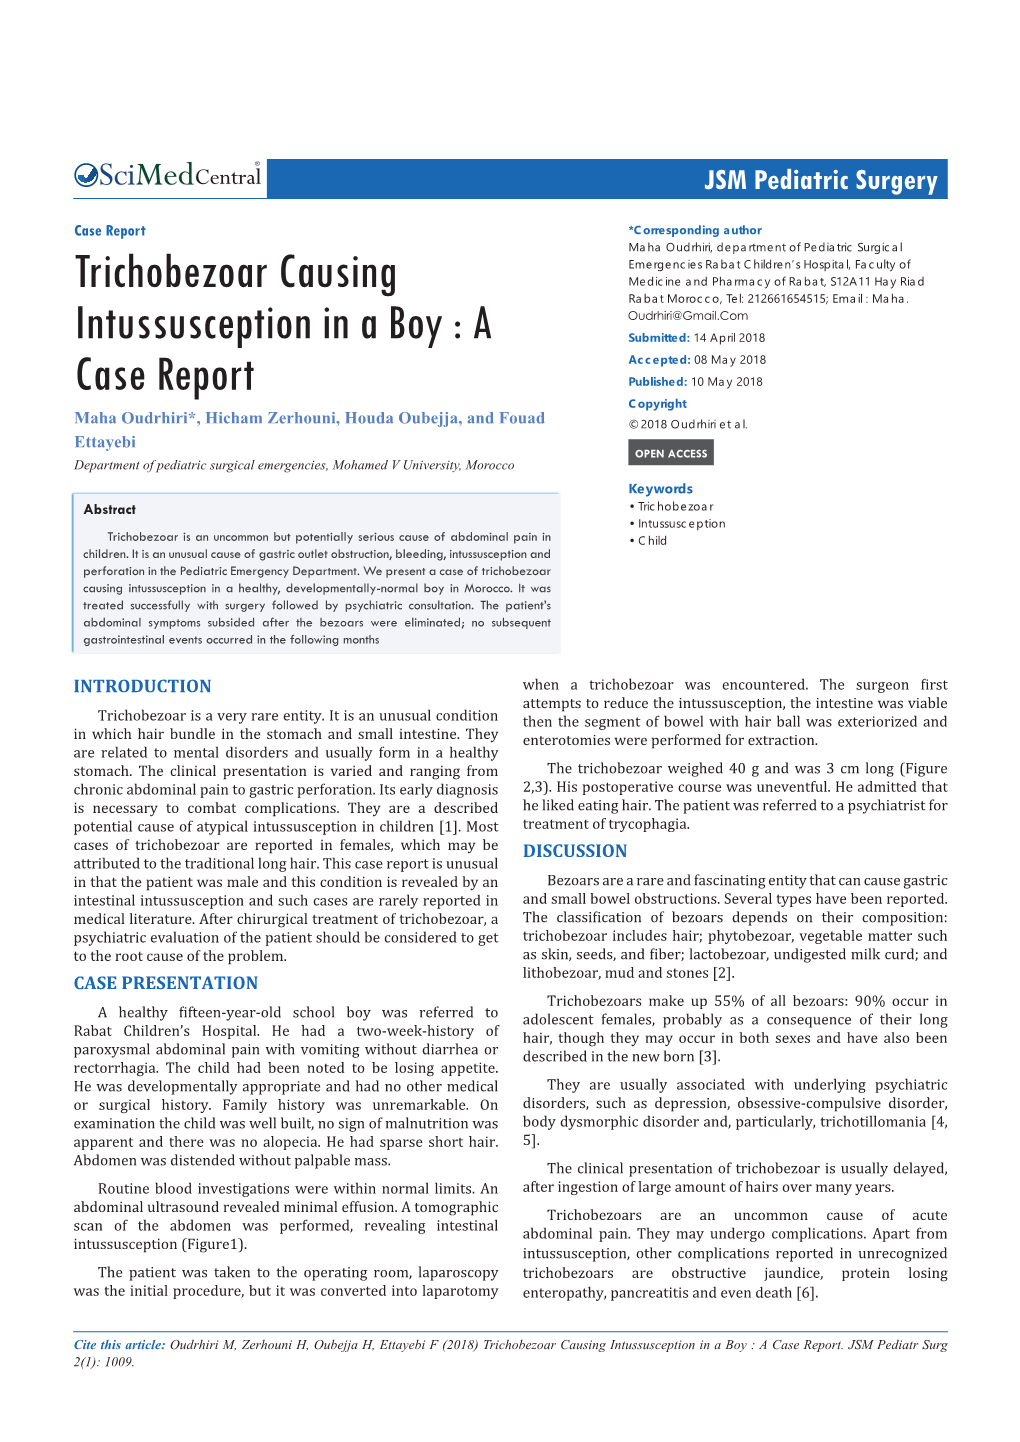 Trichobezoar Causing Intussusception in a Boy : a Case Report